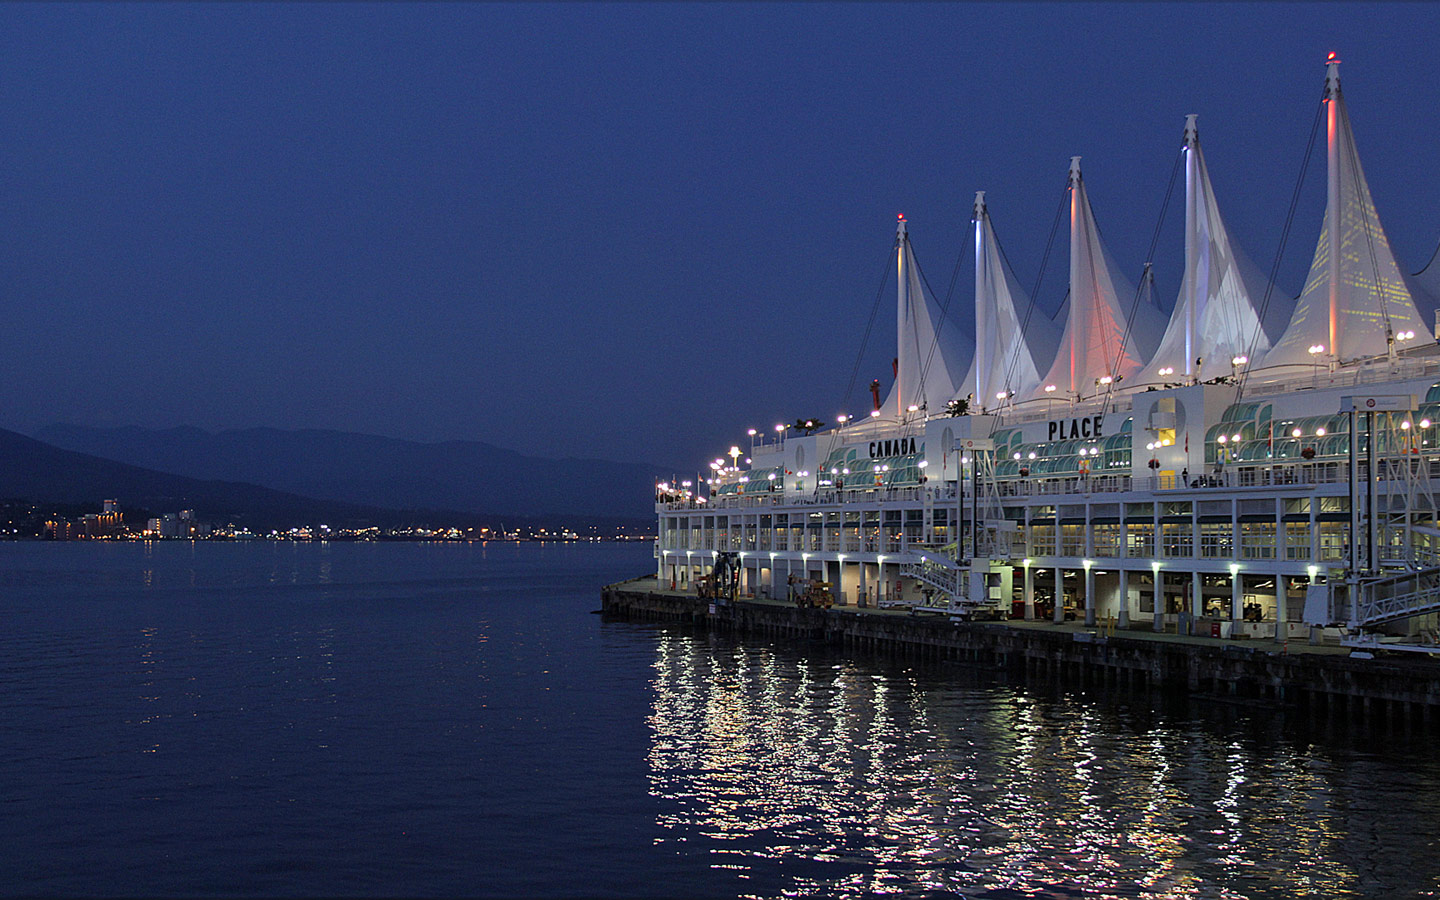 The Canada Place